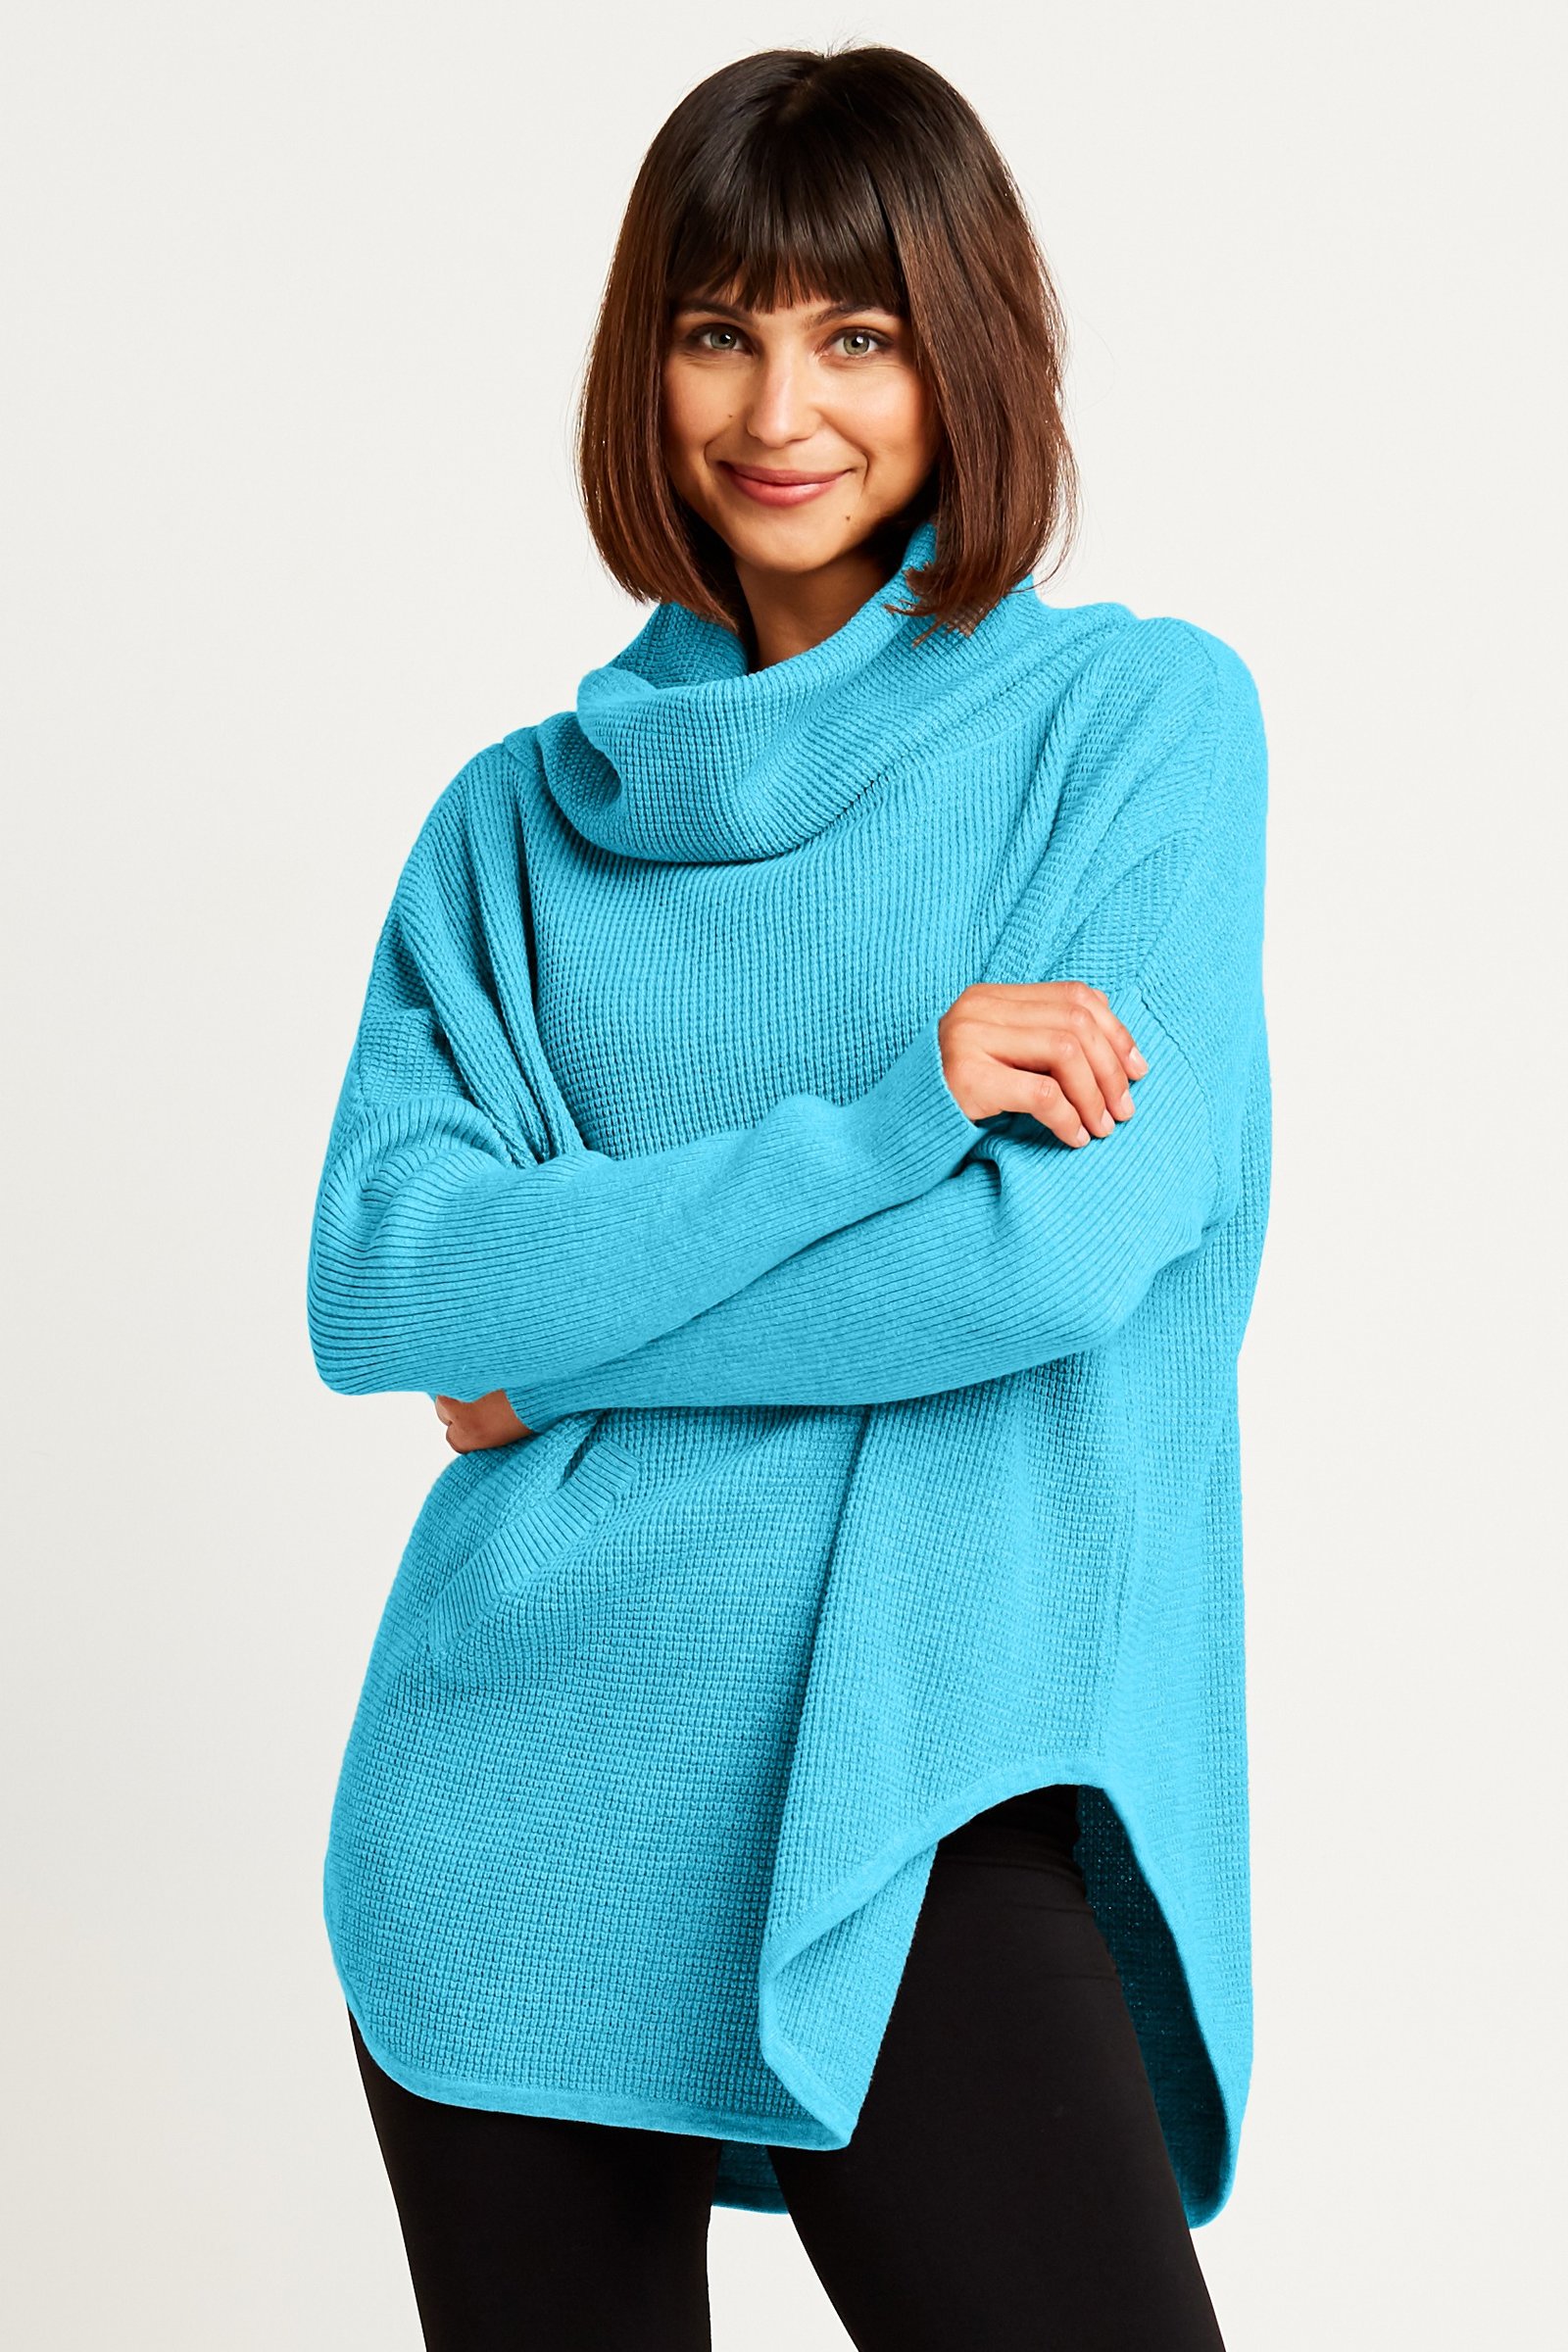 Waffle Cowl Sweater by Planet (Knit Sweater) | Artful Home